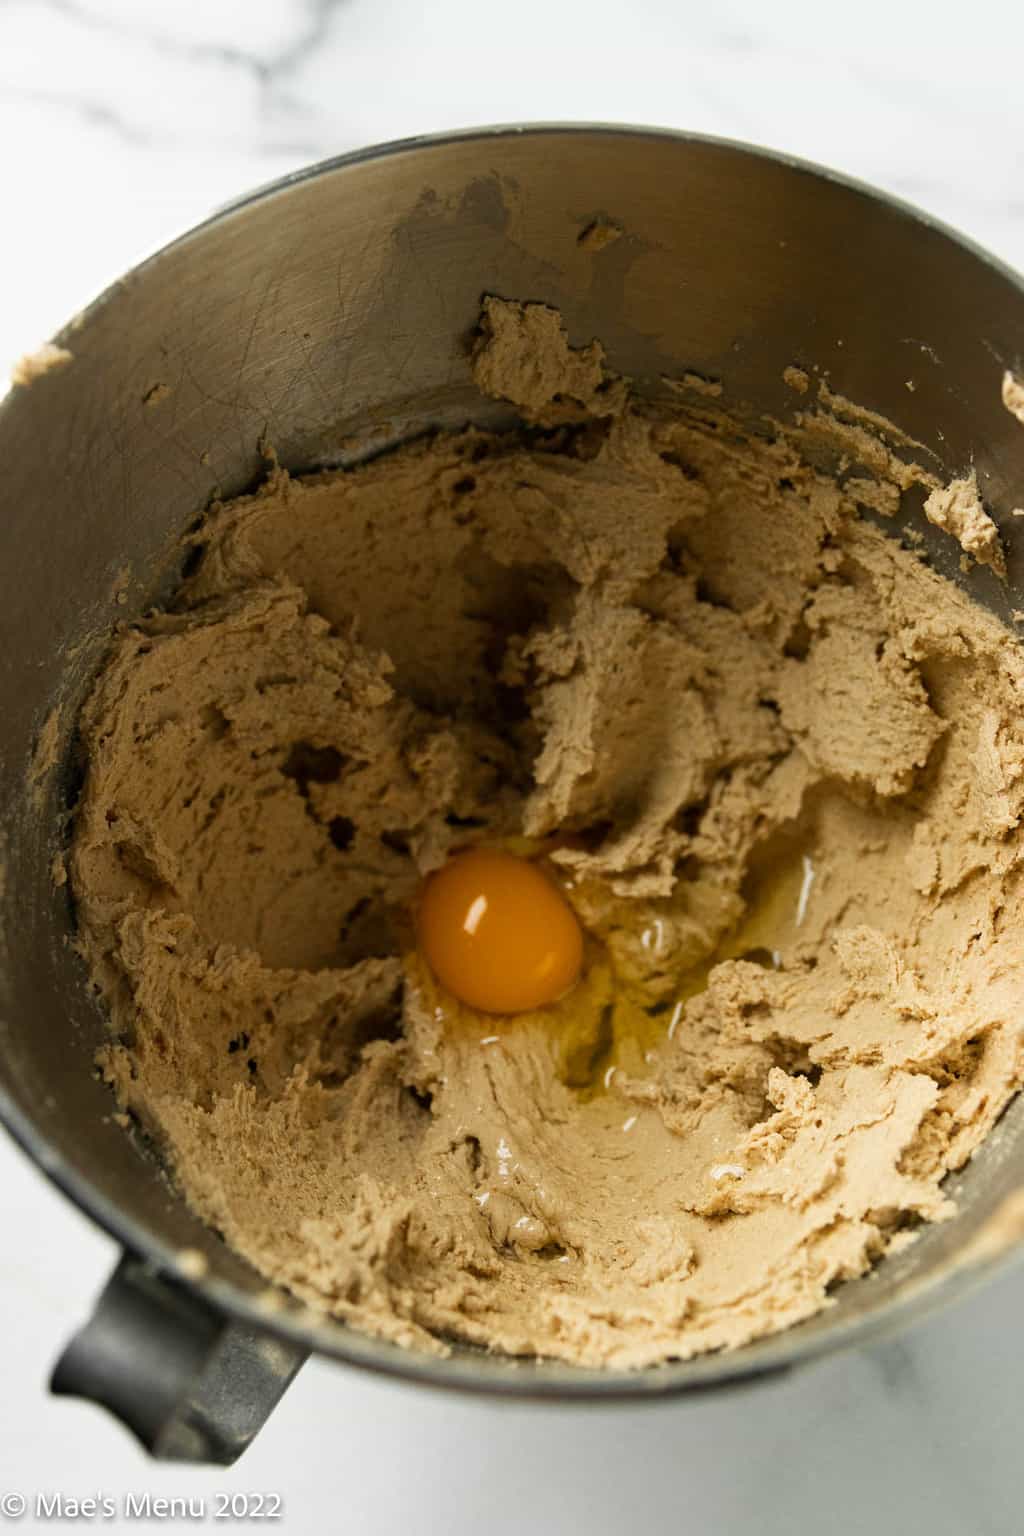 A mixing bowl with creamed brown sugar and butter with an egg added.